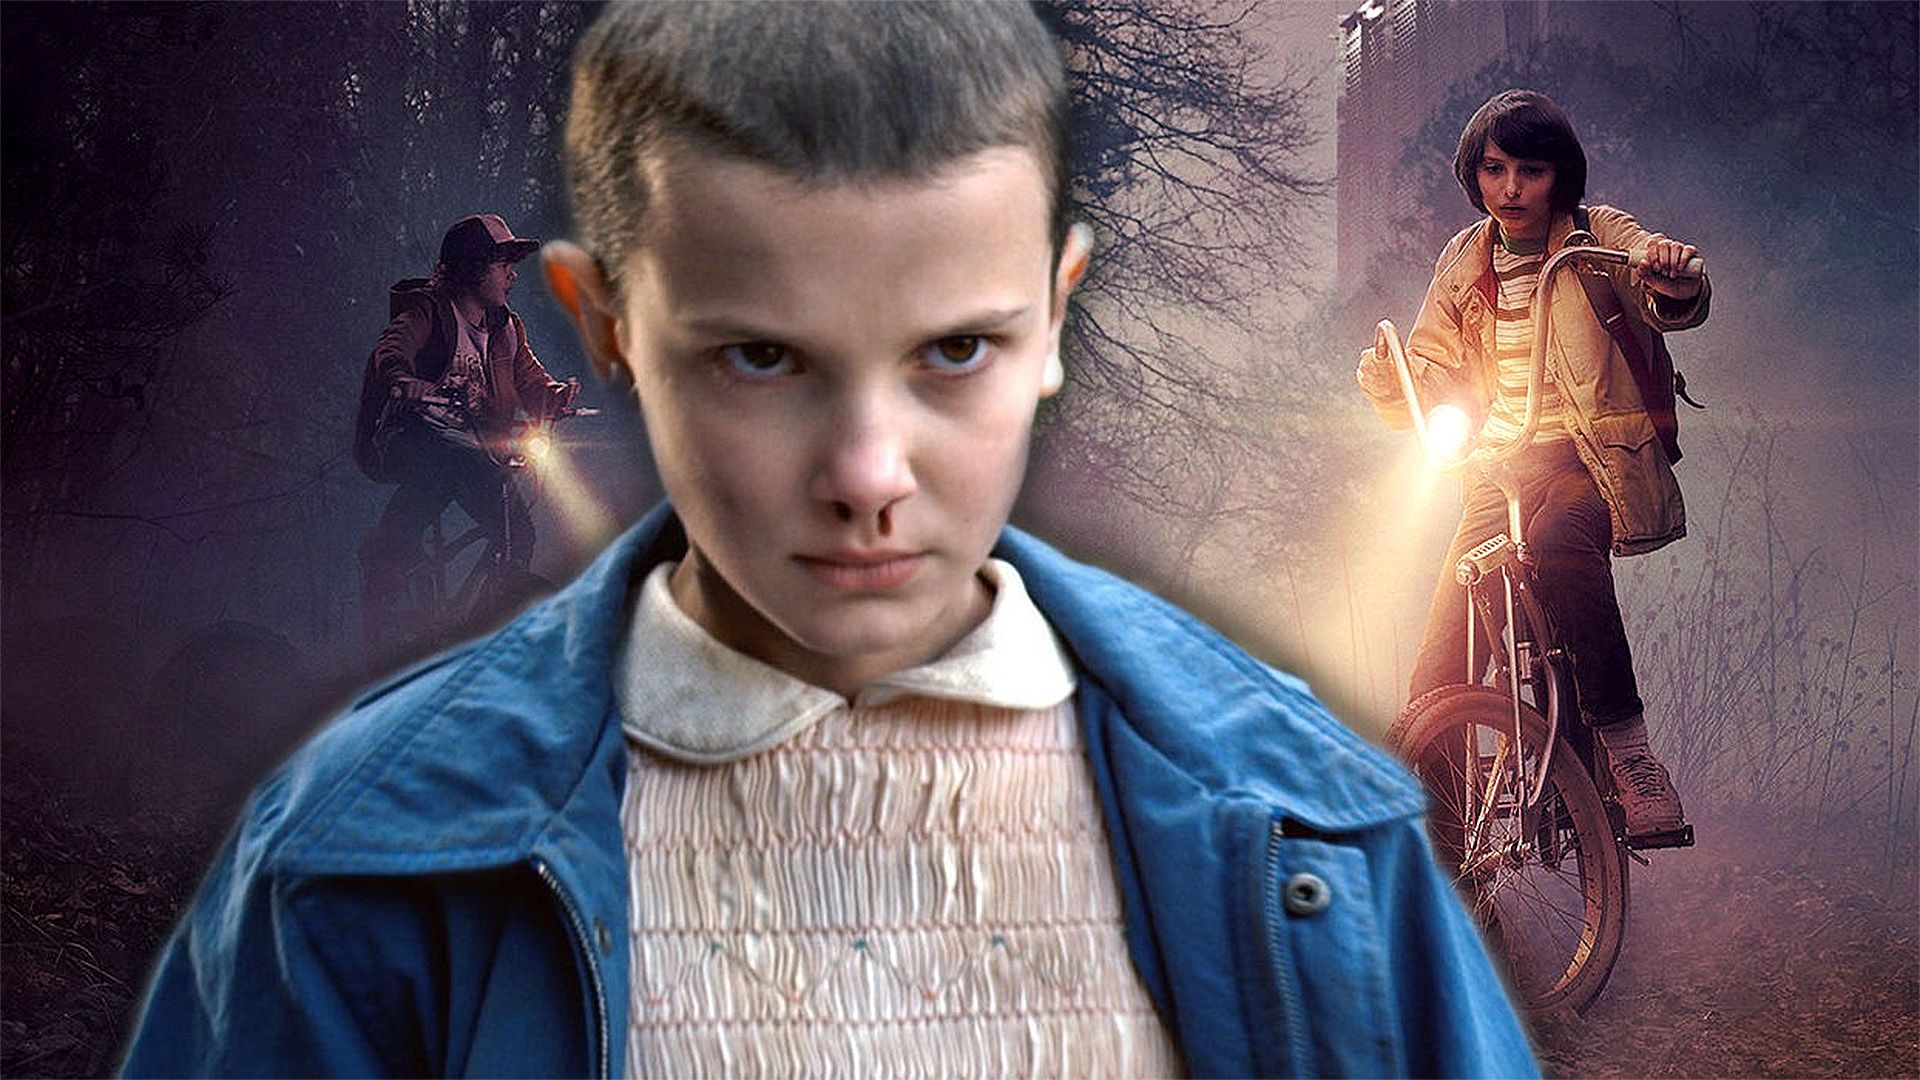 Stranger Things: A Look Back at the Season 1 Finale